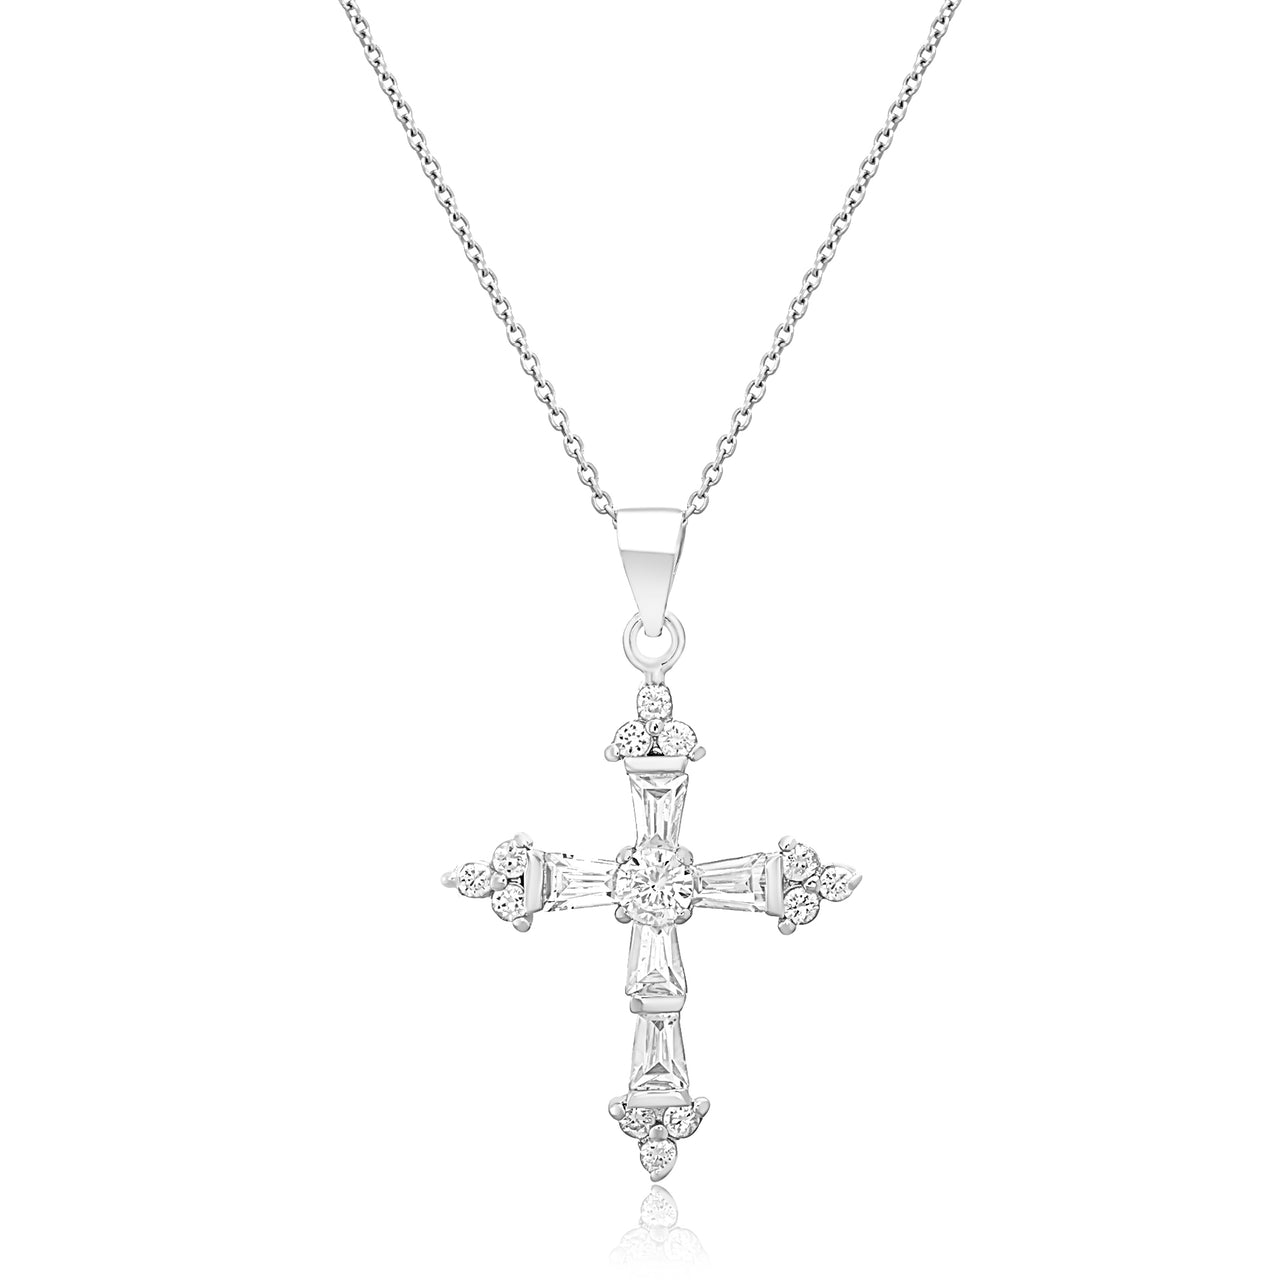 My Bible Sterling Silver Cubic Zirconia Cross Pendant Necklace